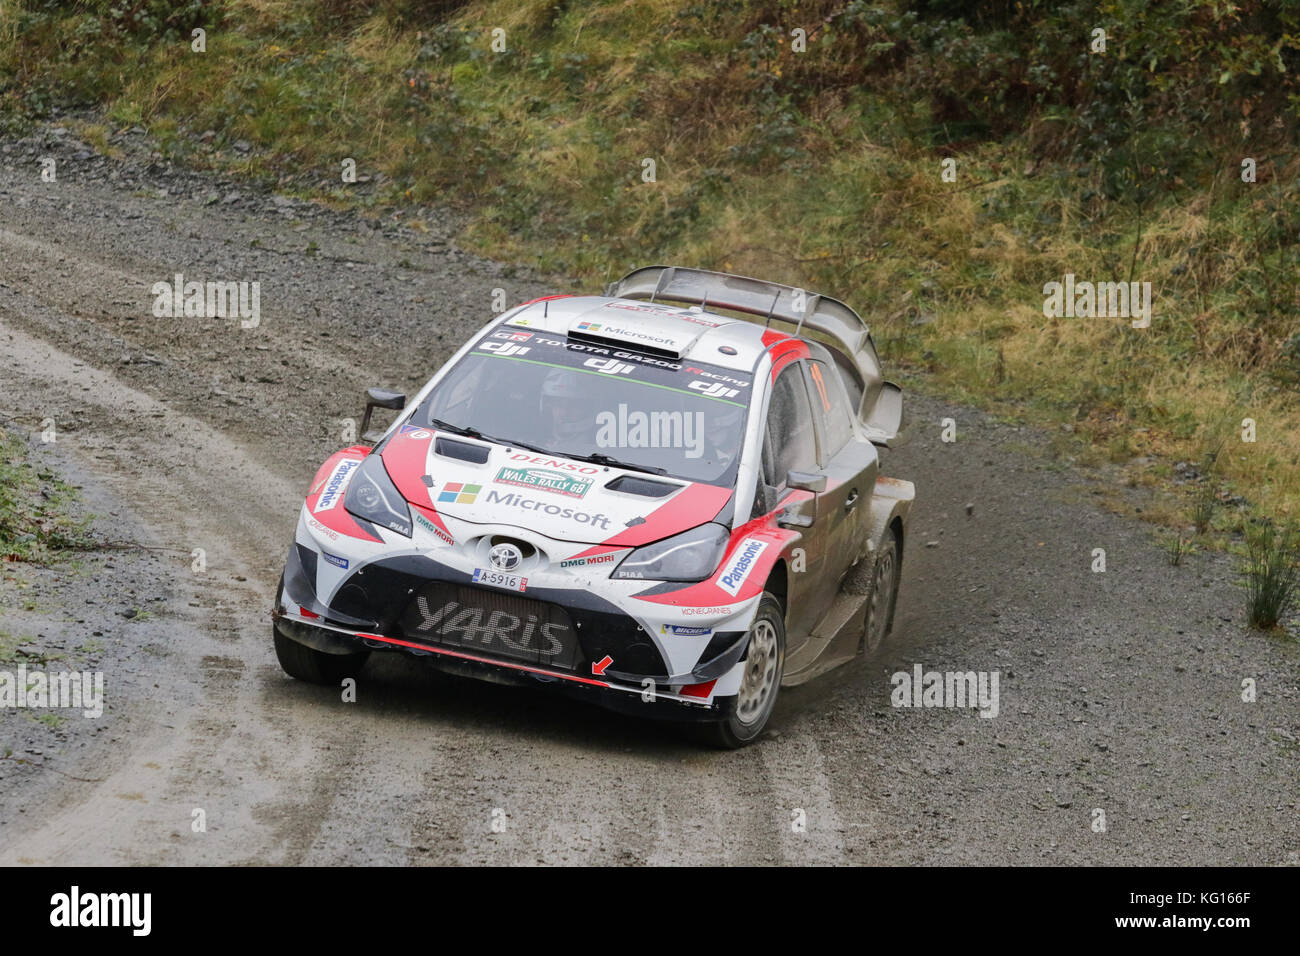 Esapekka Lappi and co-driver Janne Ferm in Toyota Yaris WRC number 12. Dyfi Forest Stage, Wales Rally GB 2017. Stock Photo